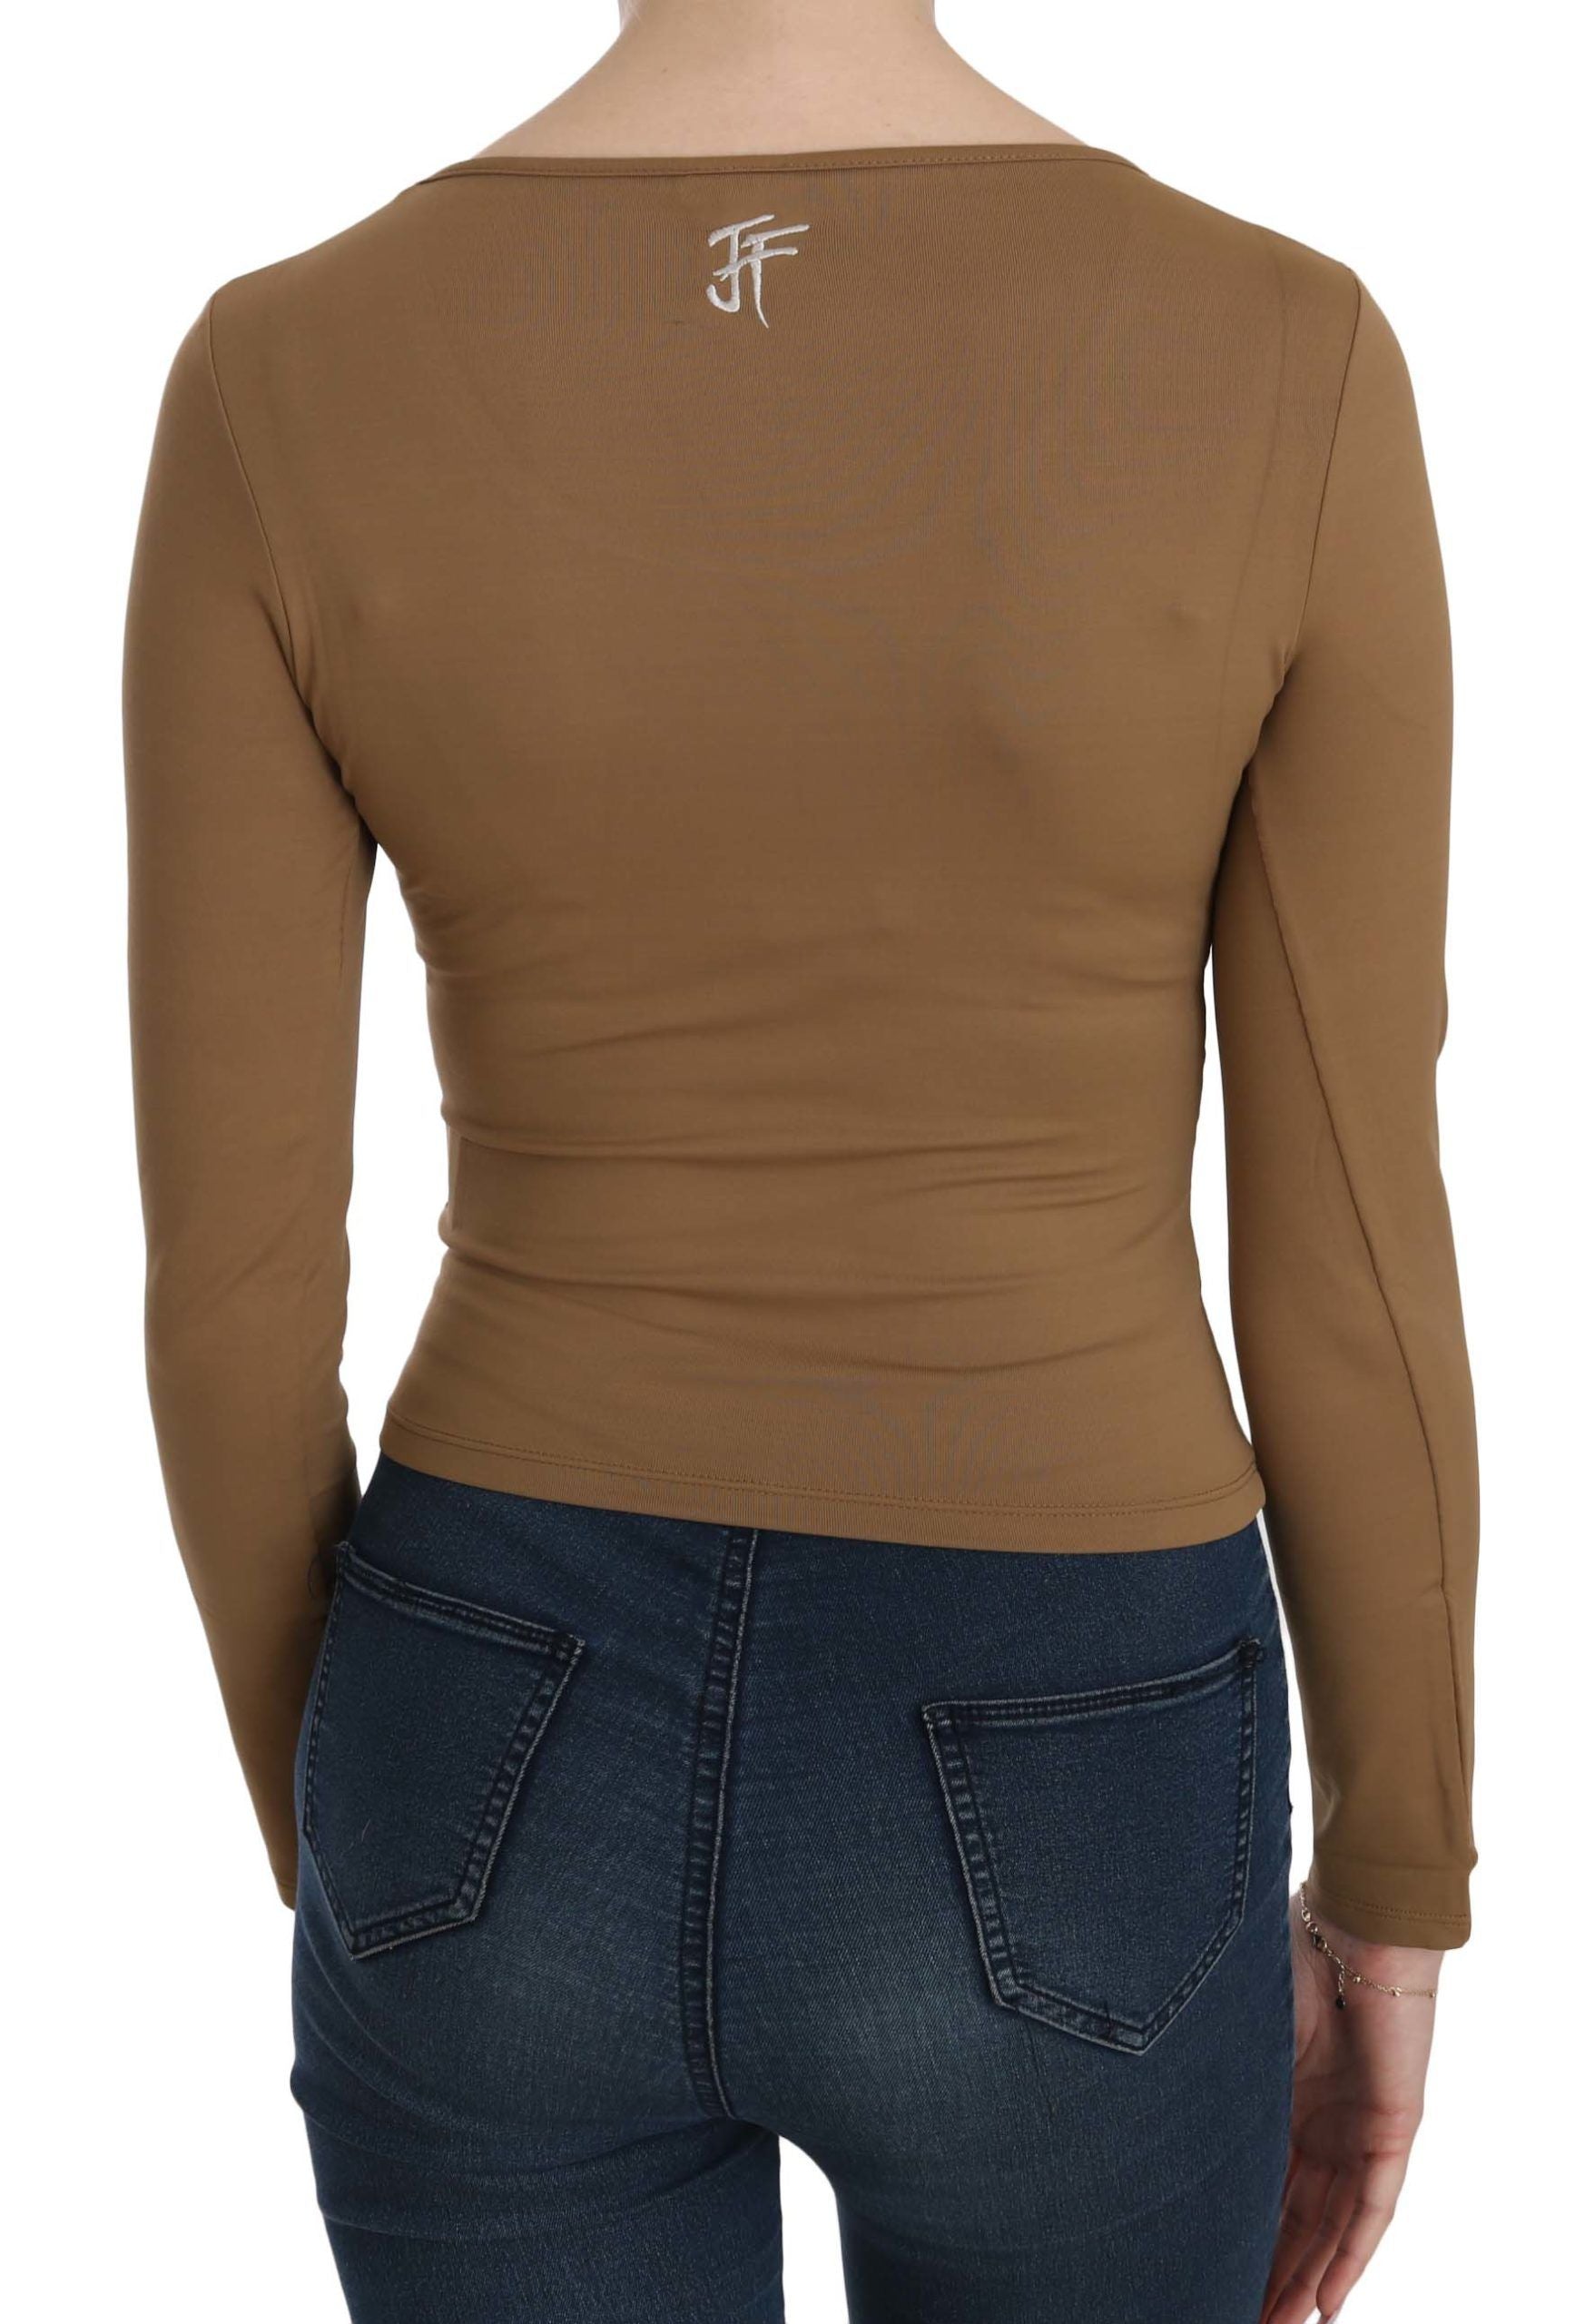 Brown Long Round Neck Sleeve Fitted Shirt Tops Blouse - Designed by GF Ferre Available to Buy at a Discounted Price on Moon Behind The Hill Online Designer Discount Store